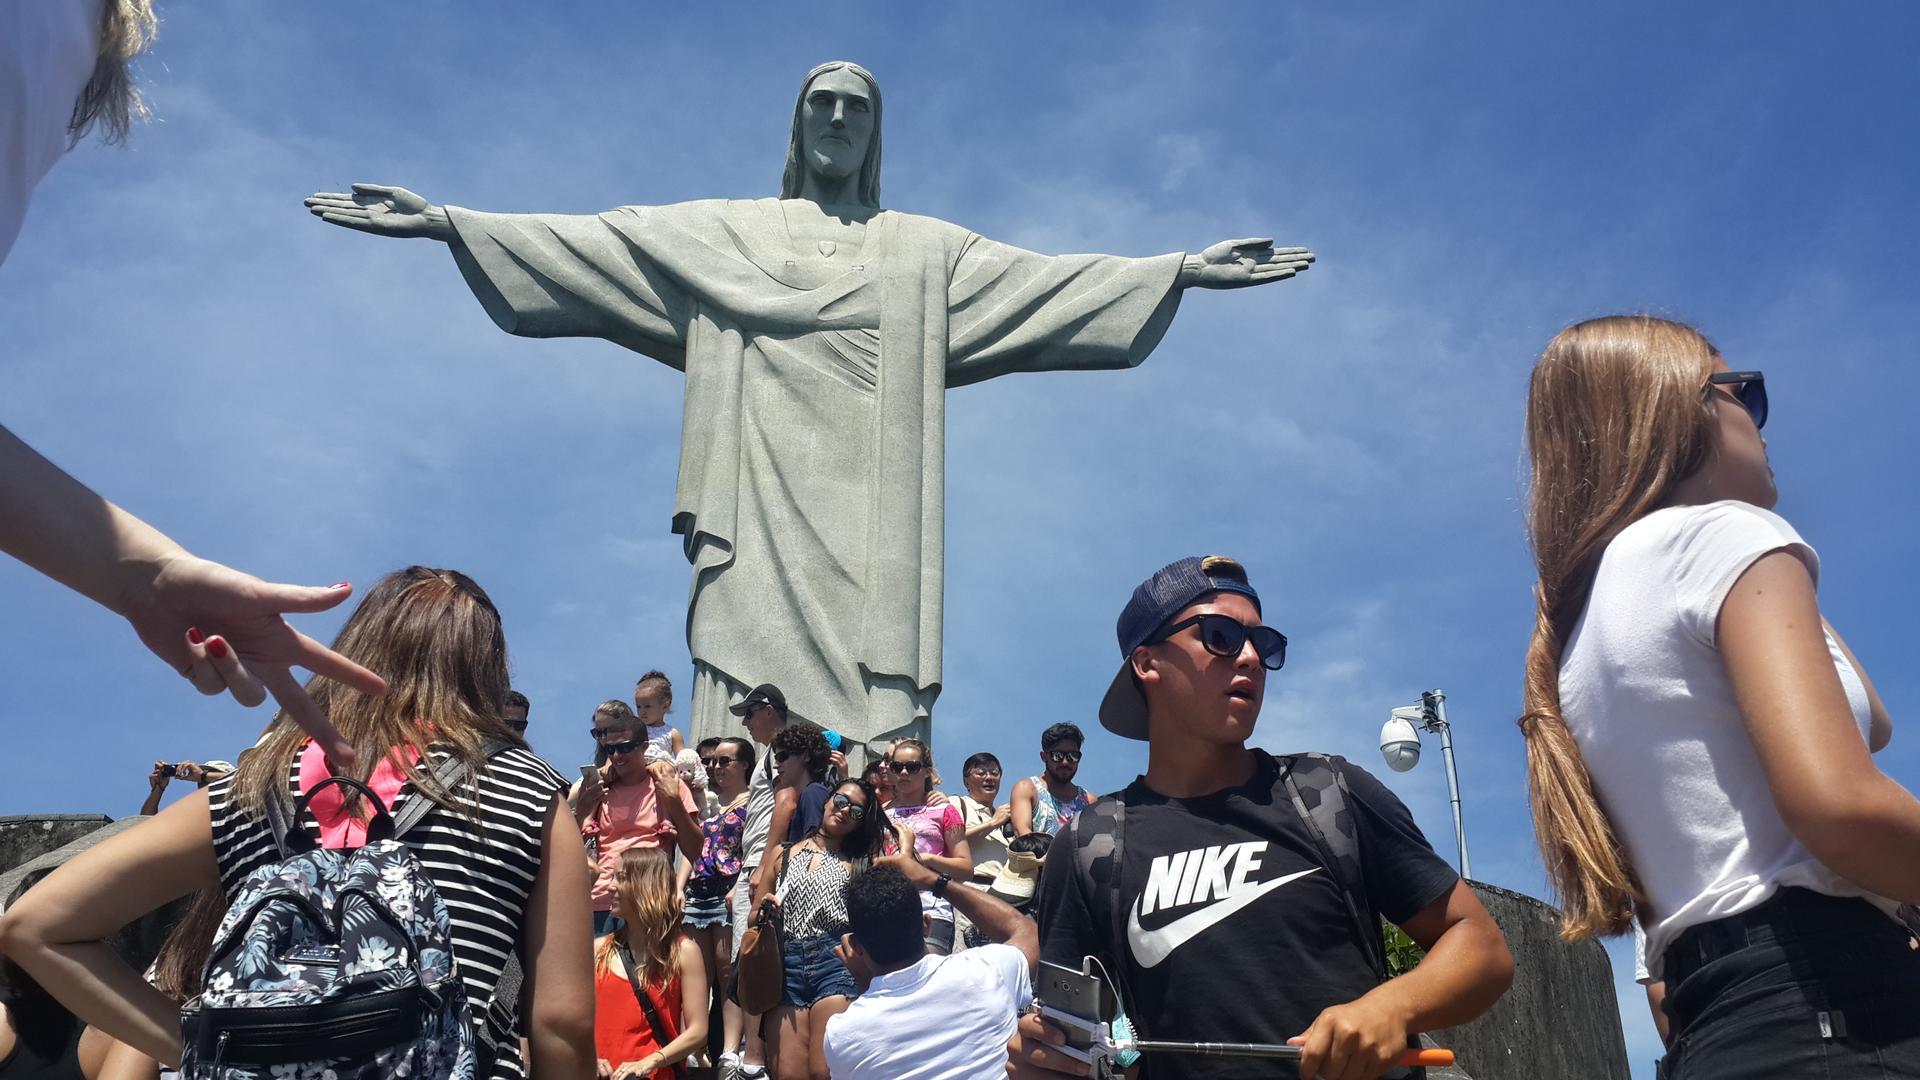 Crowd in Christ the Redeemer, Rio de Janeiro. It was impossible to get a good picture about the statue.